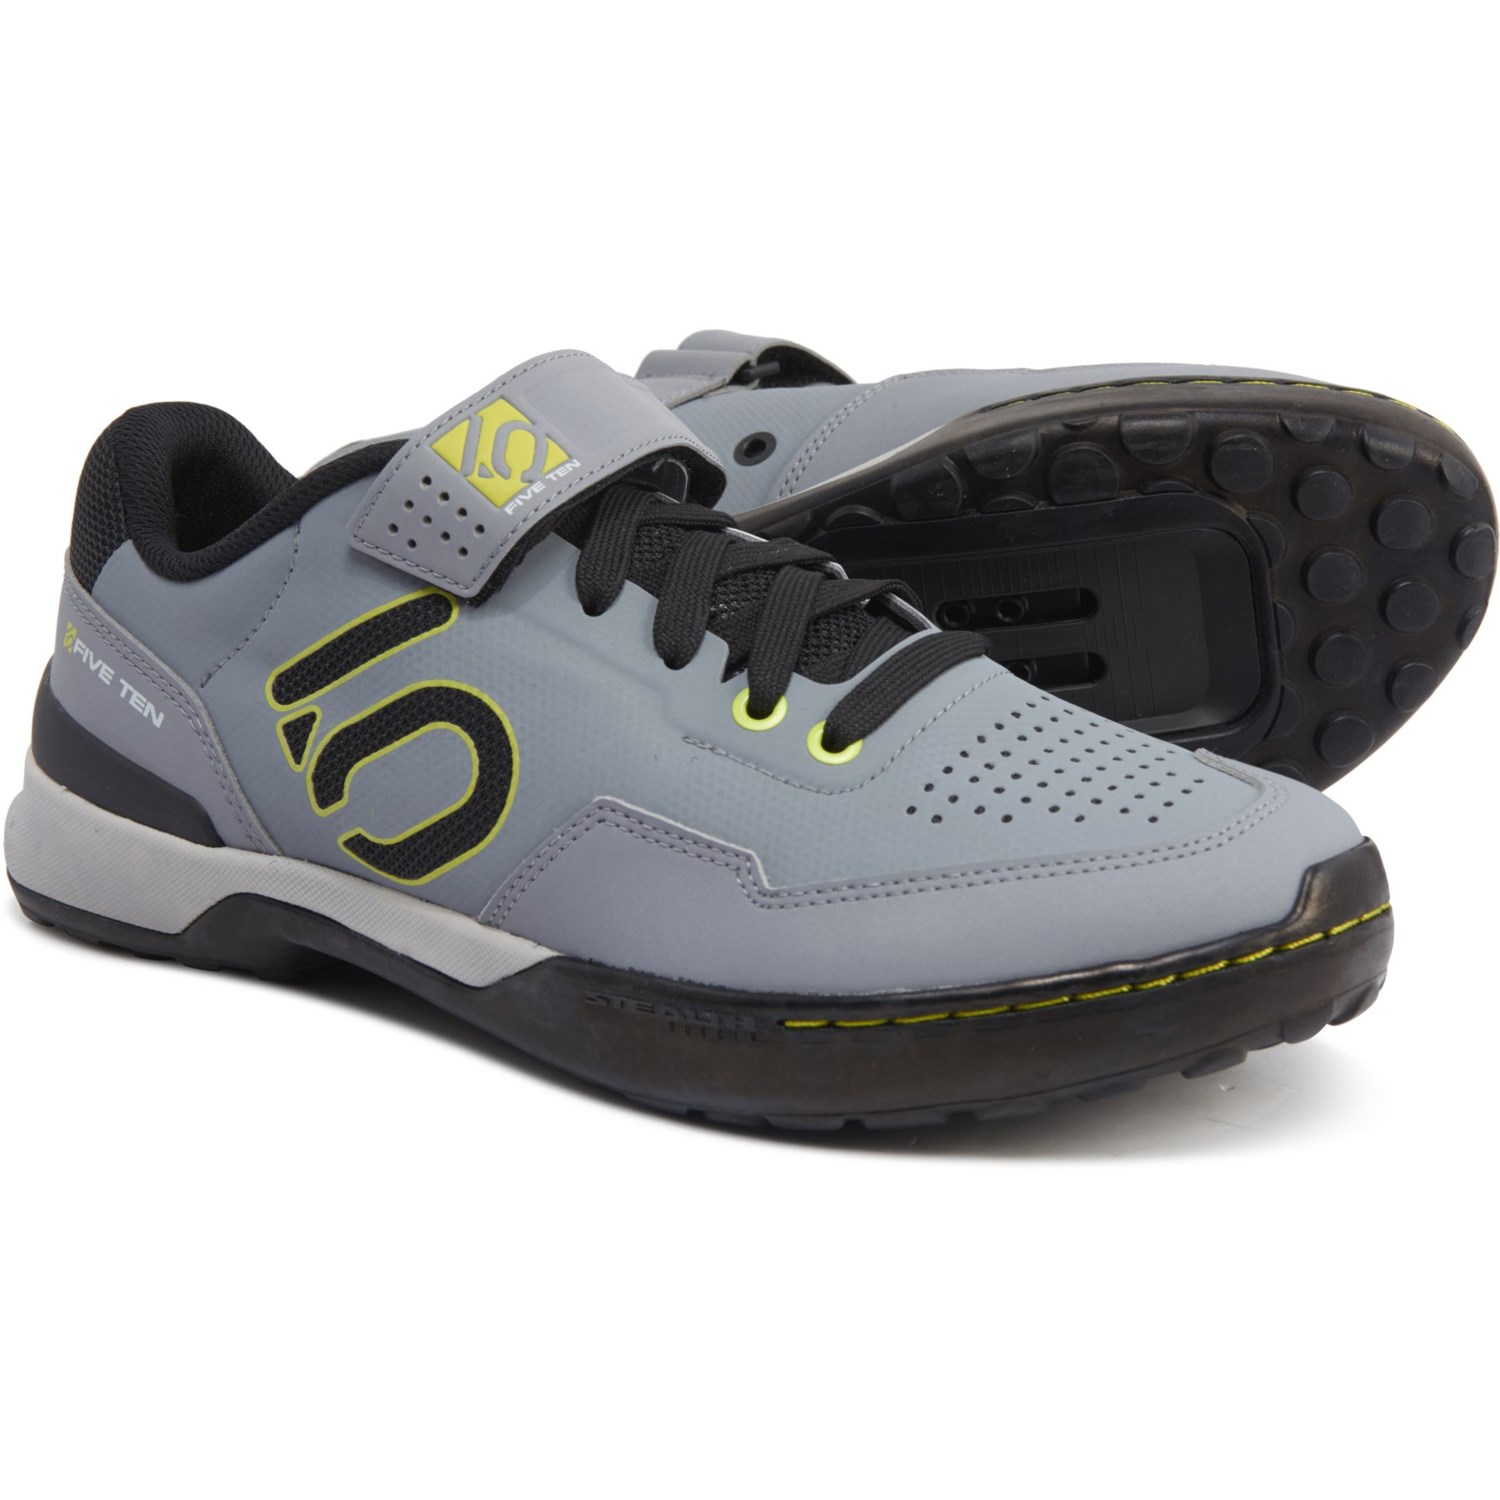 spd mens cycling shoes